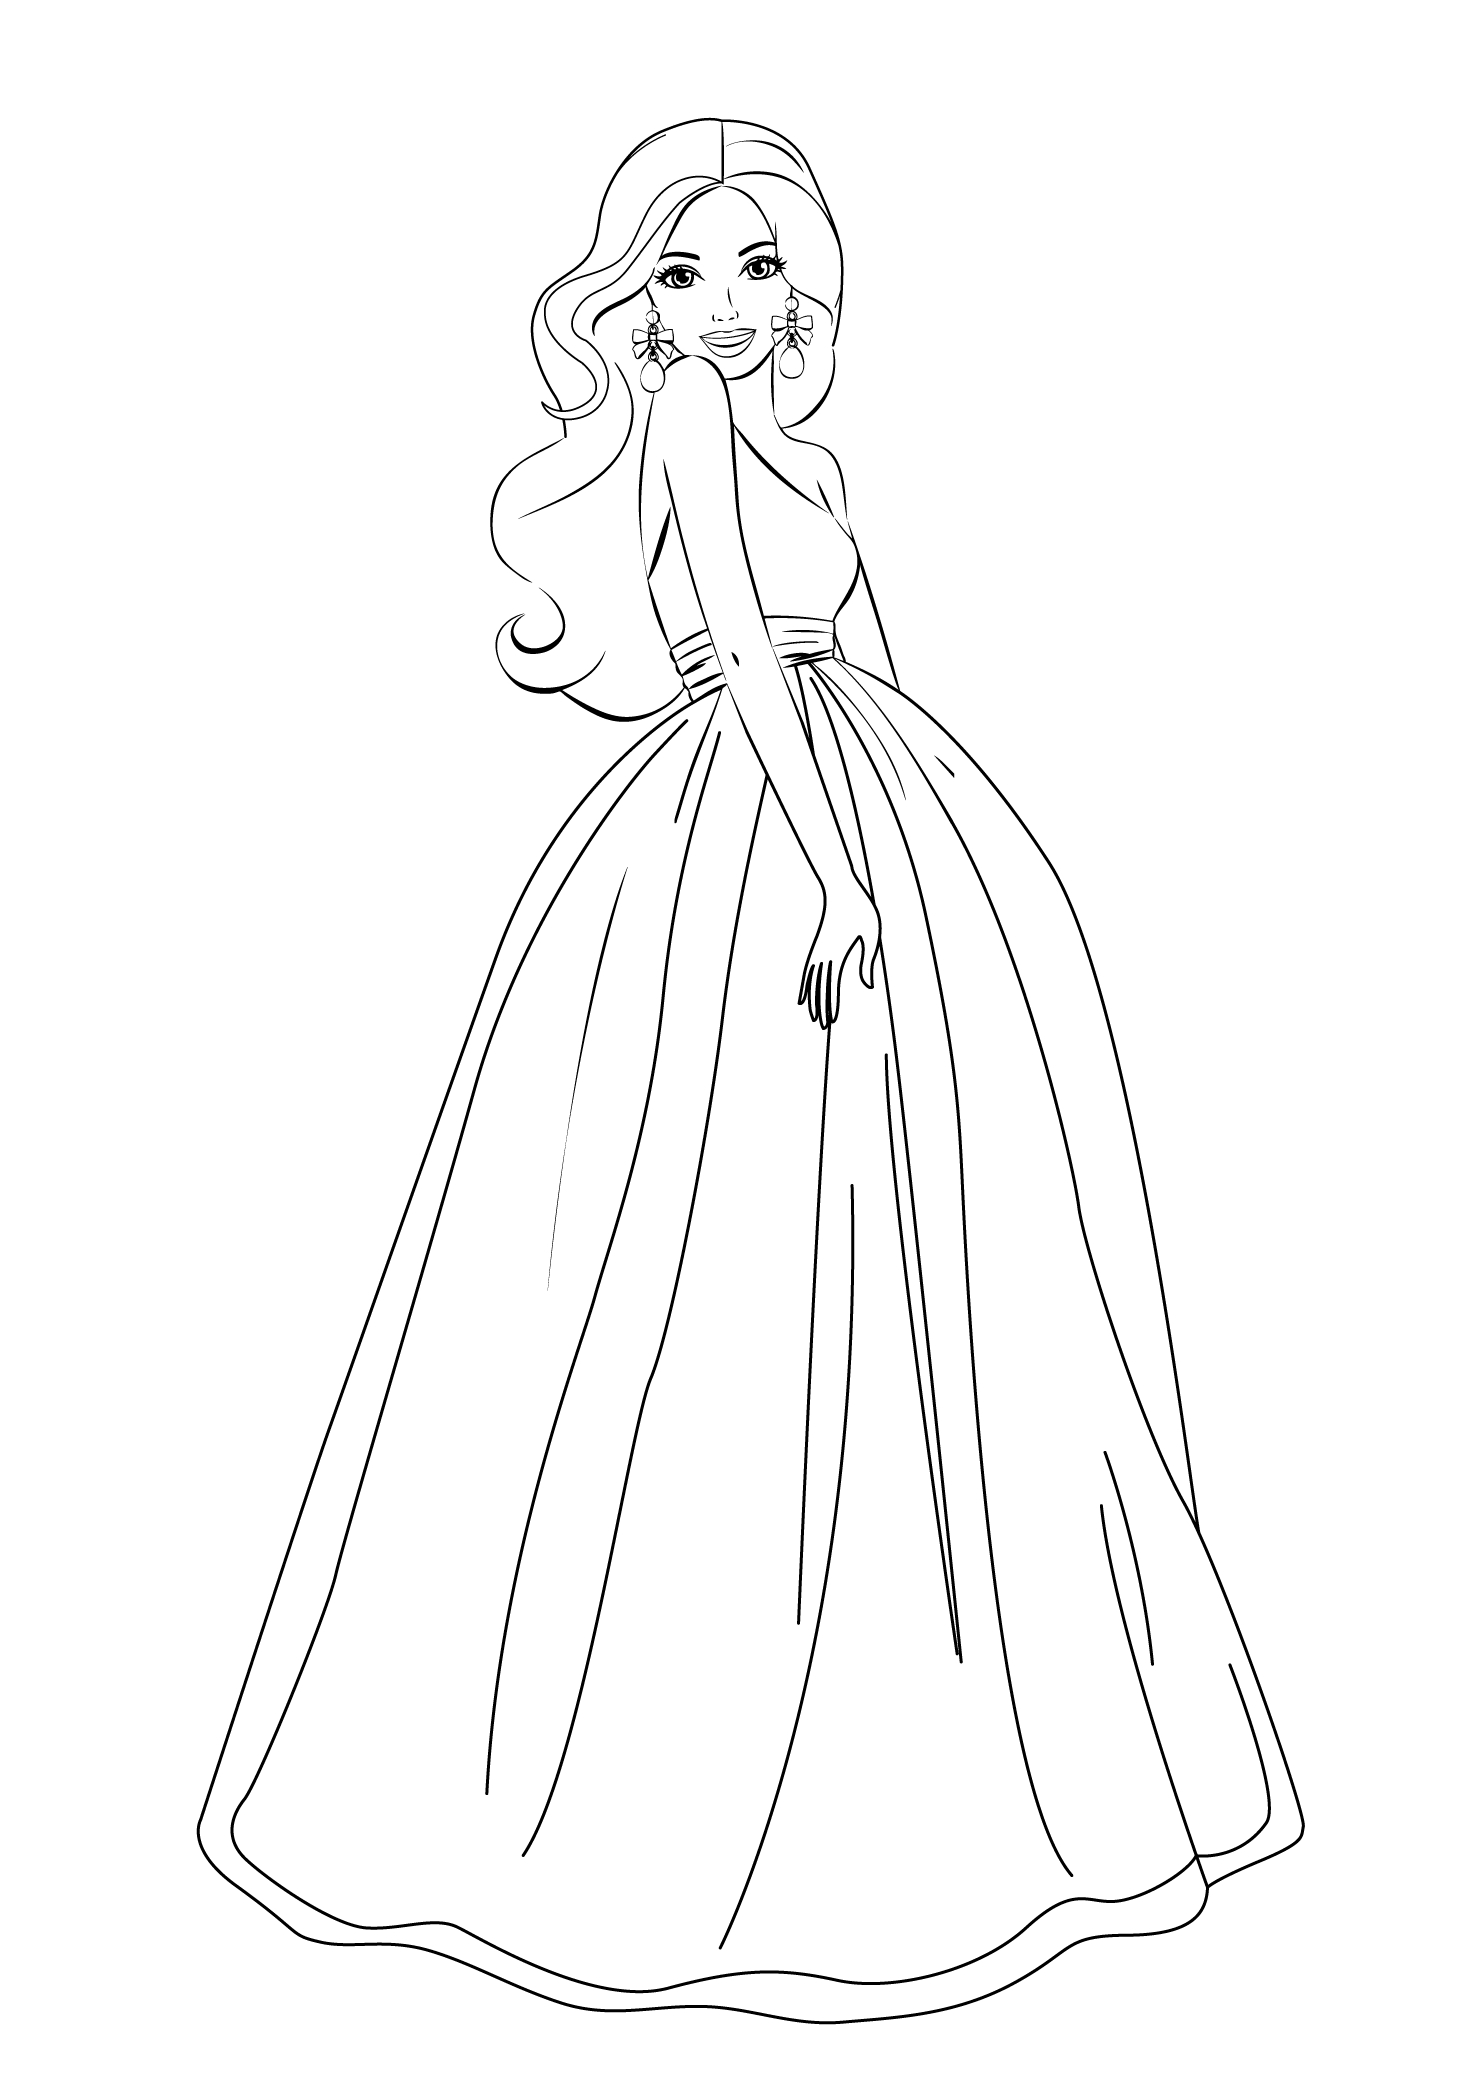 Barbie Dress Coloring Pages Cheap Sale, 20 OFF   www ...